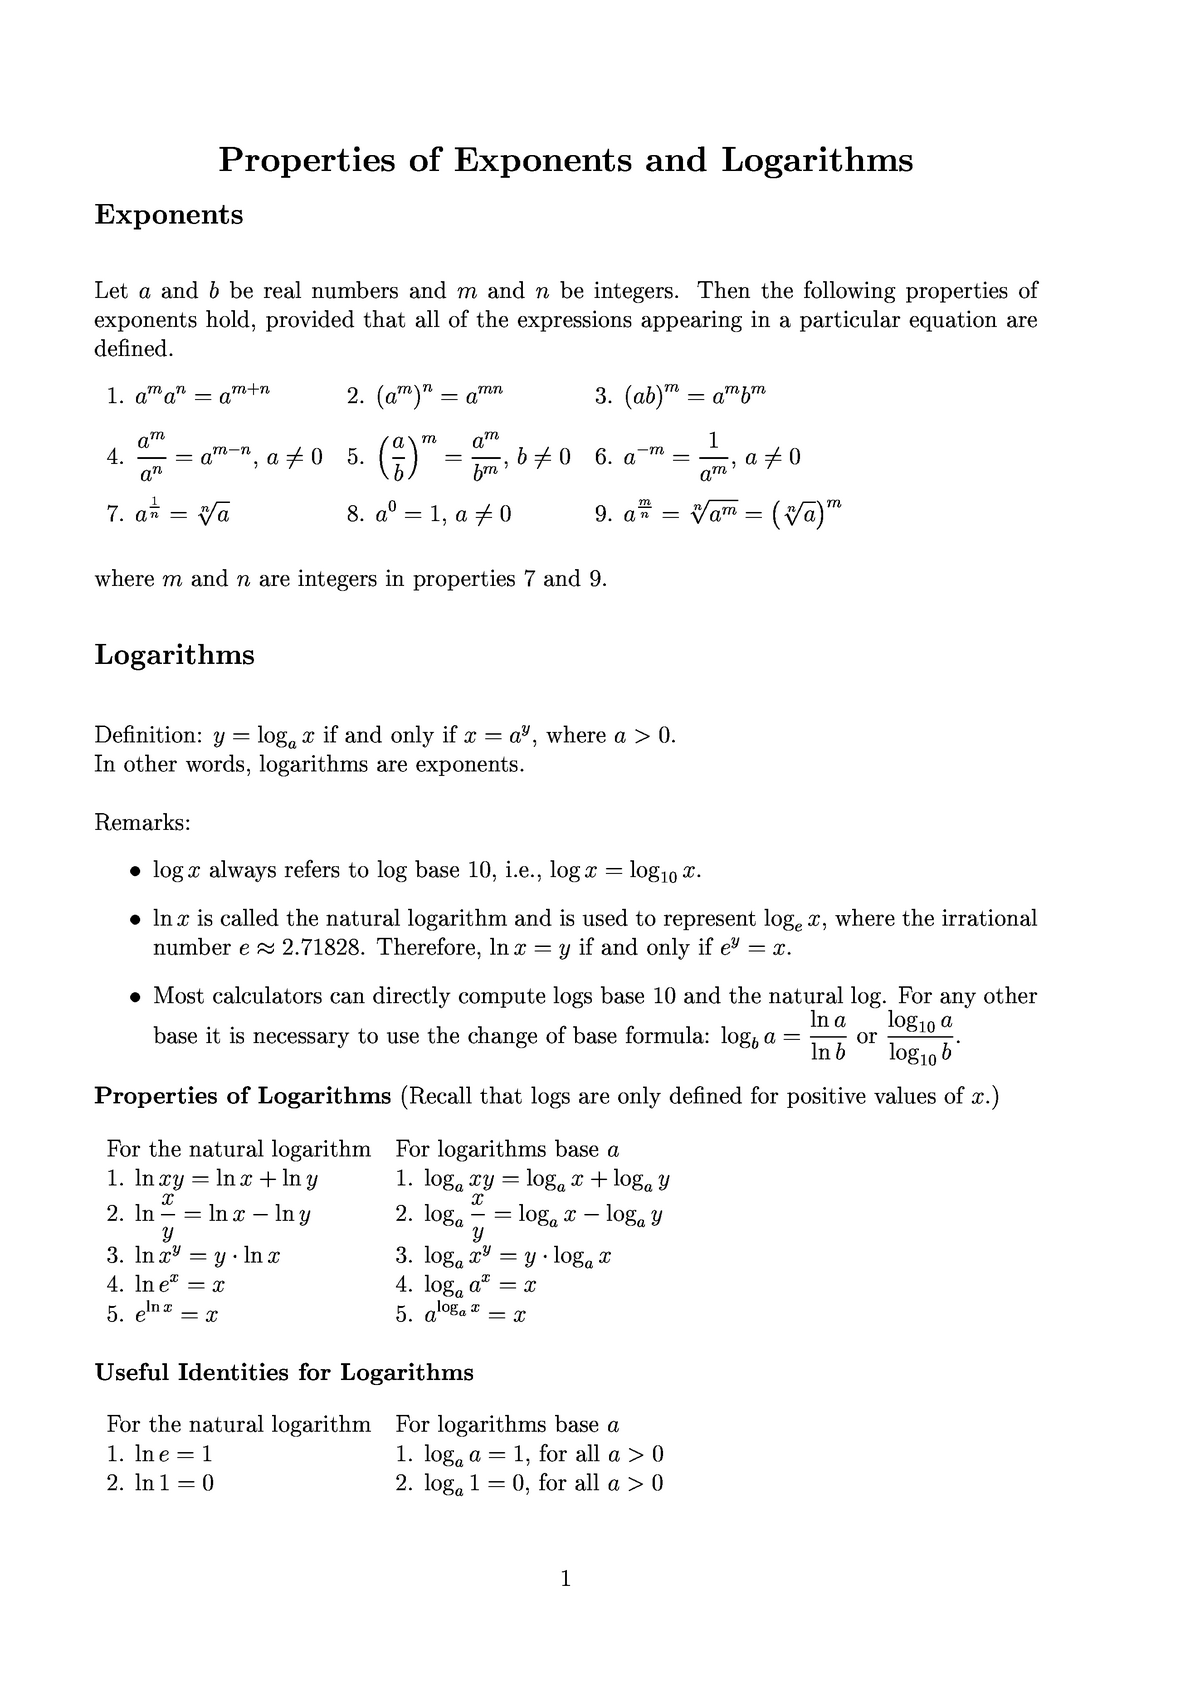 exponents-and-logarithms-pr-rt-s-ts-r-t-s-ts-t